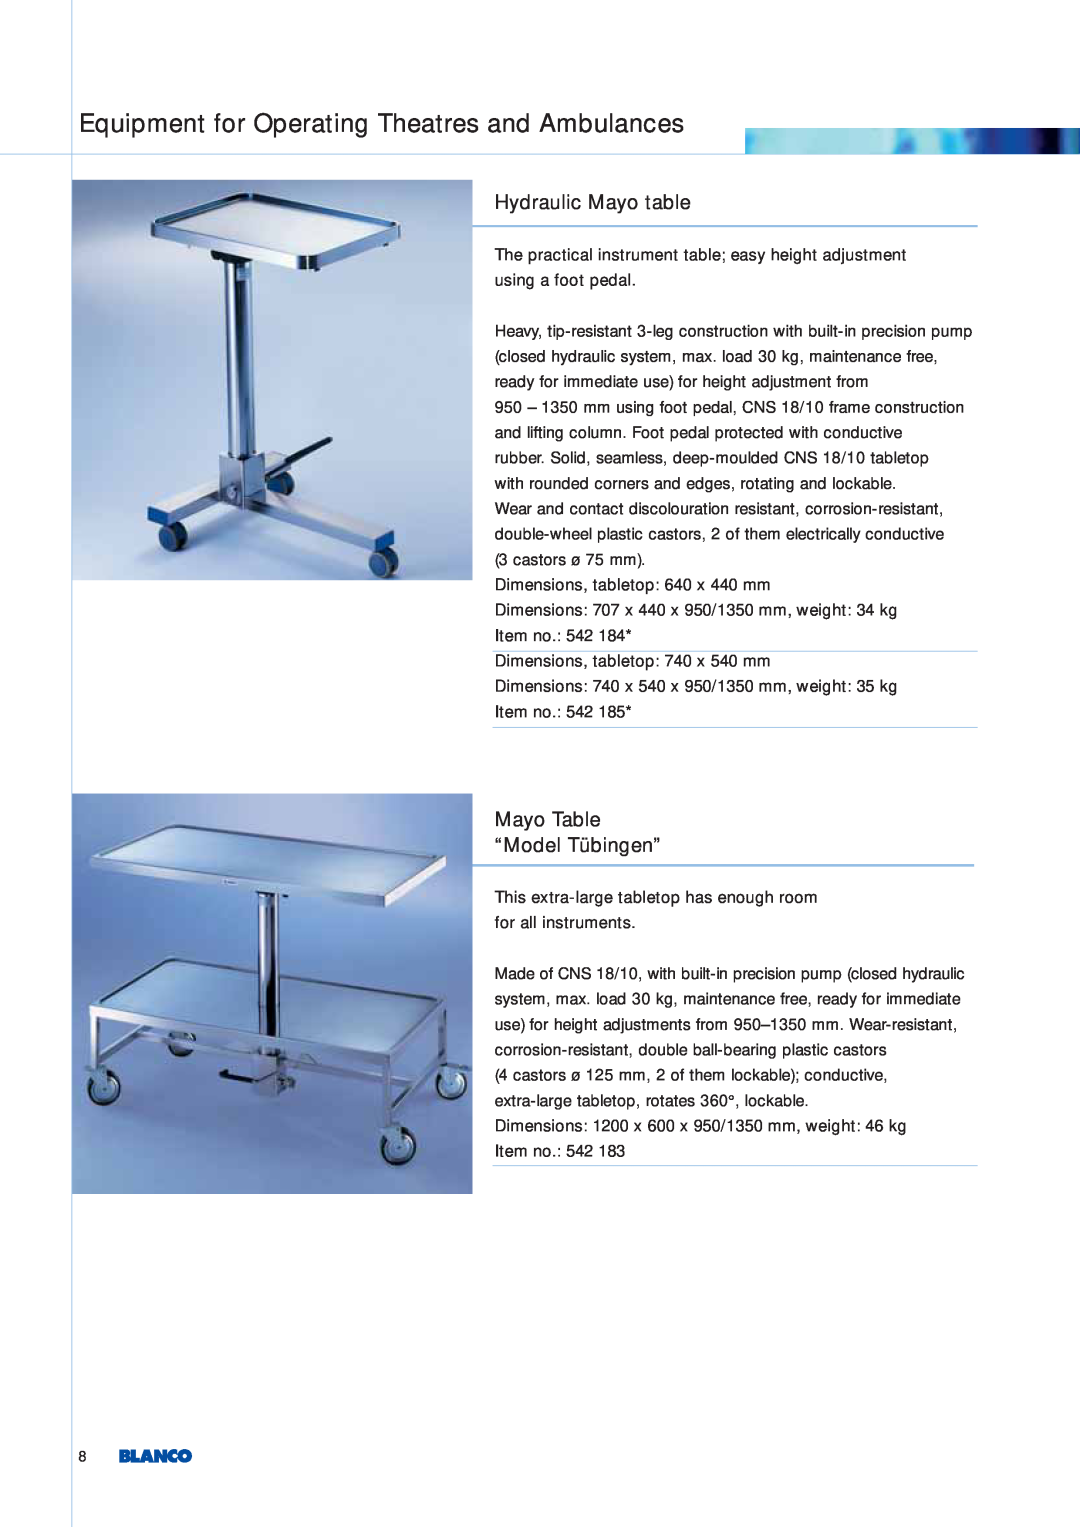 Blanco Tbingen manual Hydraulic Mayo table, Mayo Table “Model Tübingen”, Equipment for Operating Theatres and Ambulances 